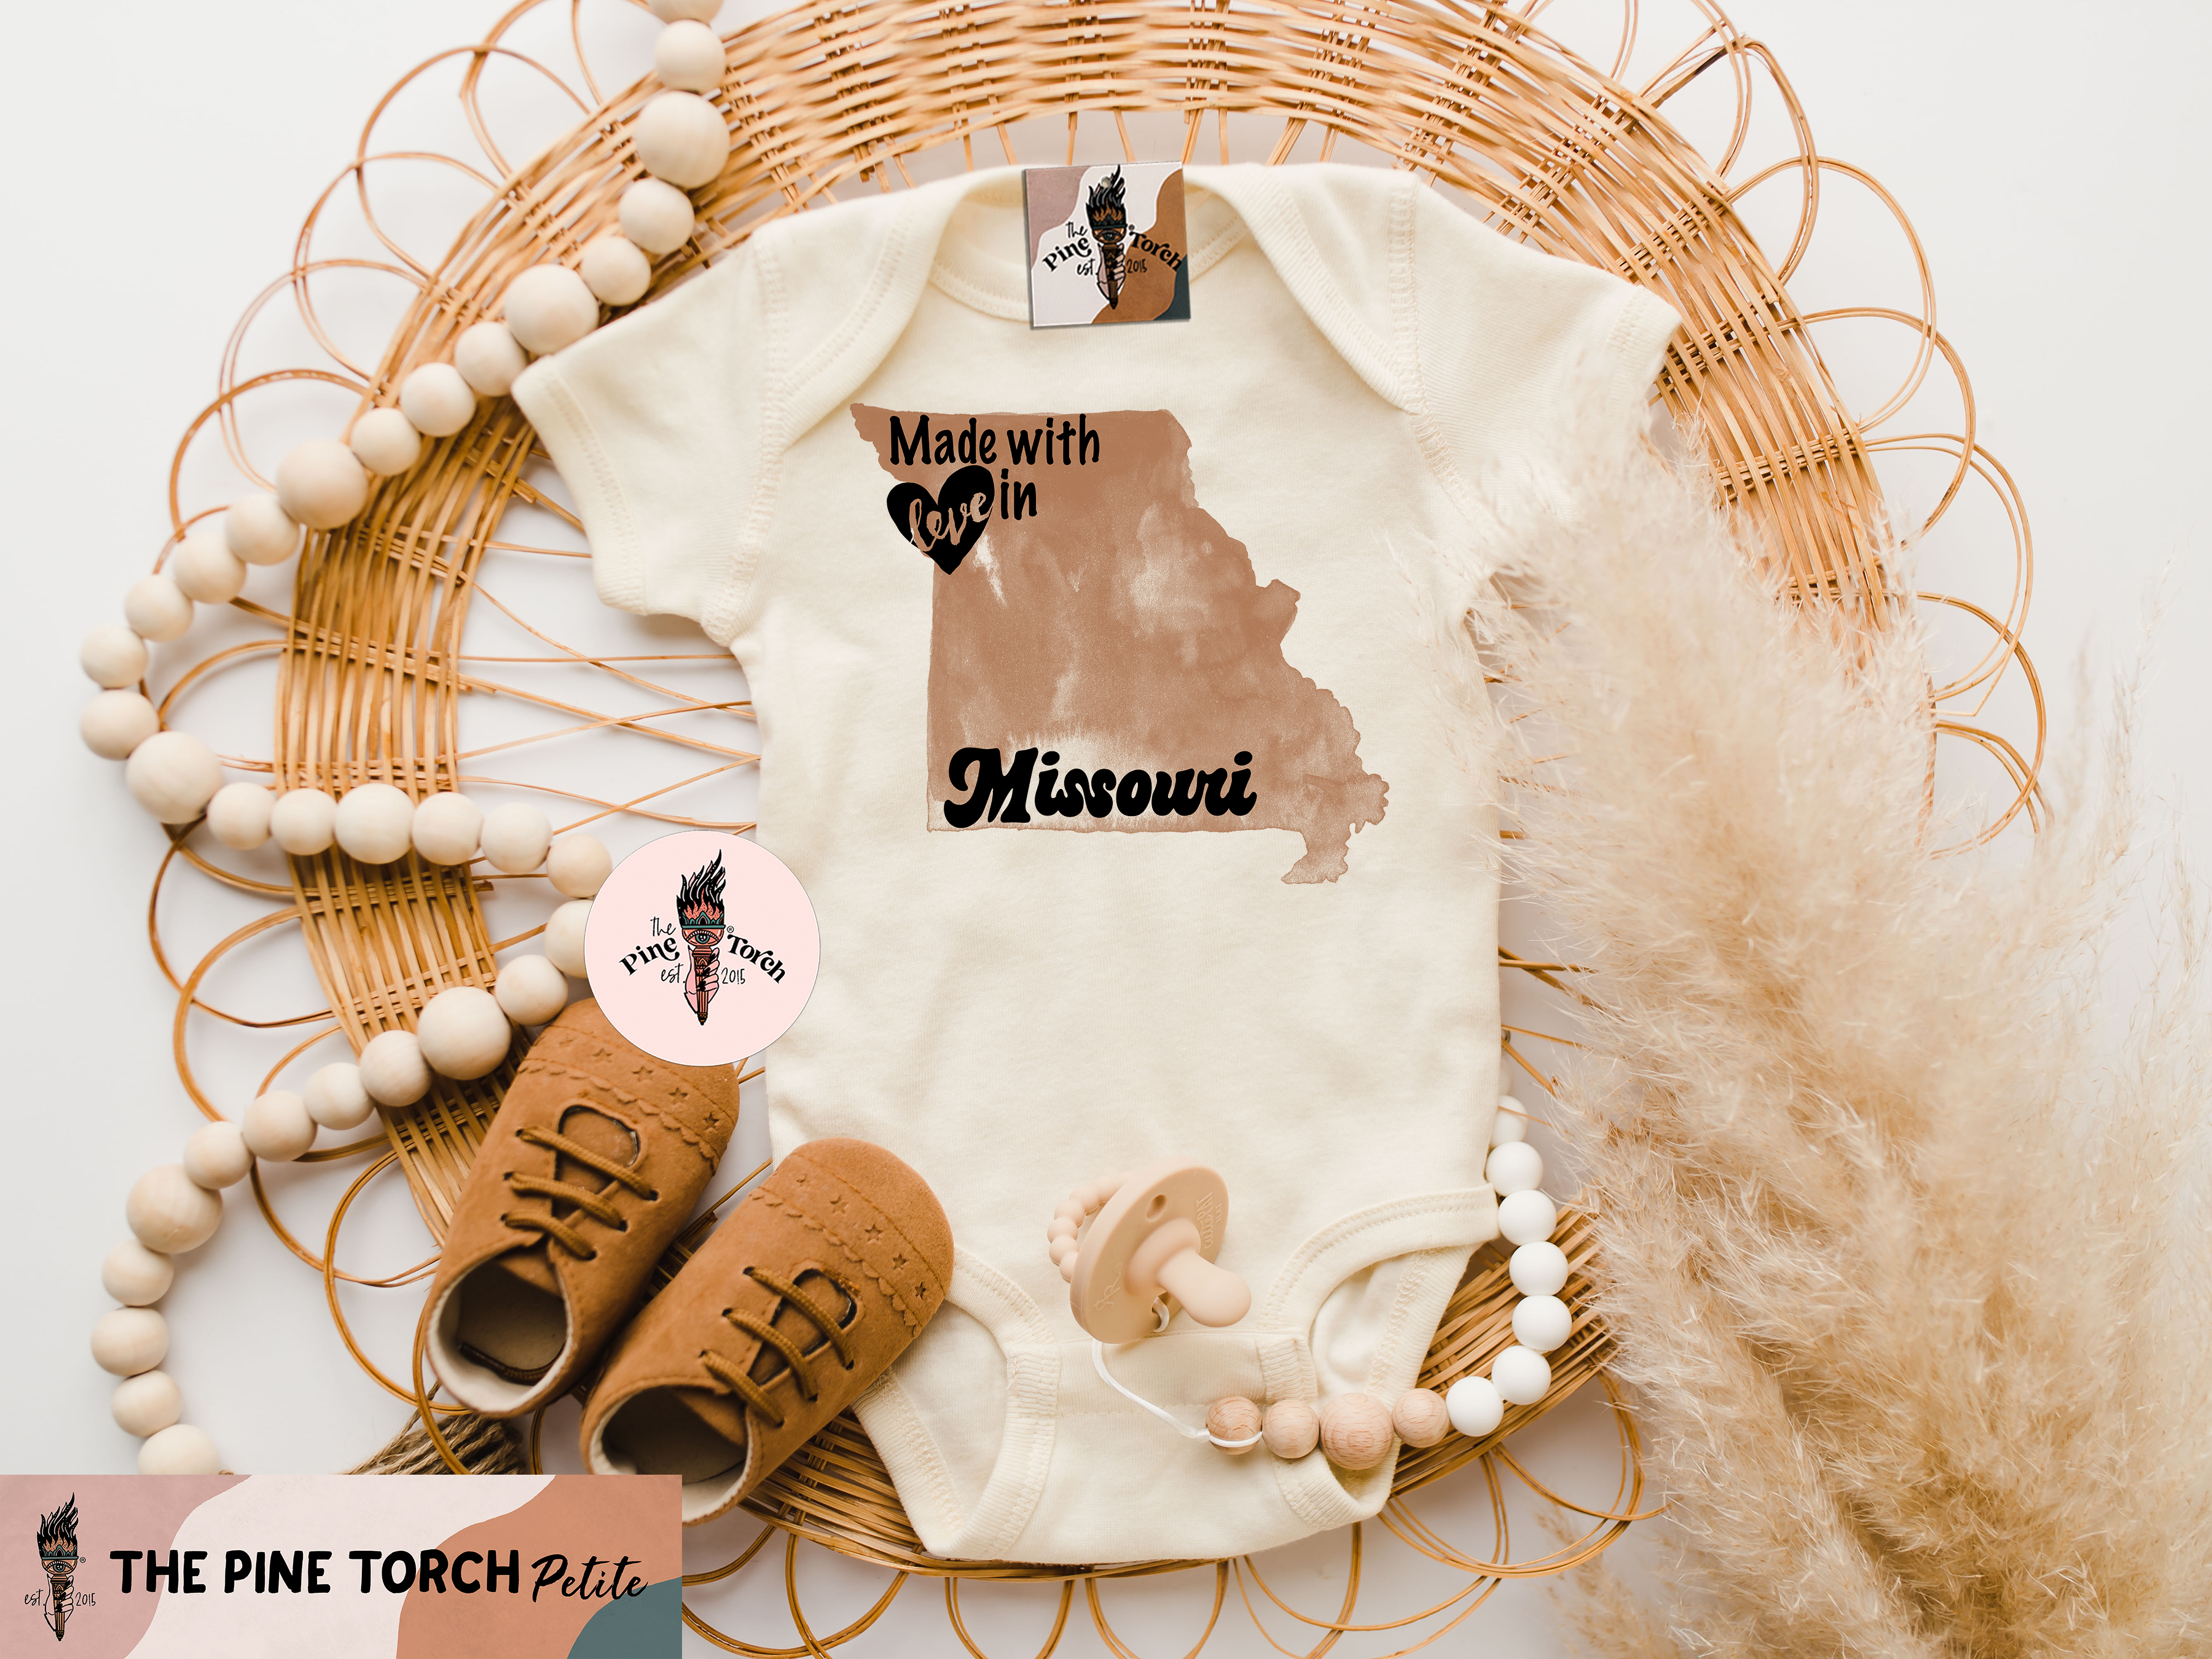 « MADE WITH LOVE IN MISSOURI » BODYSUIT